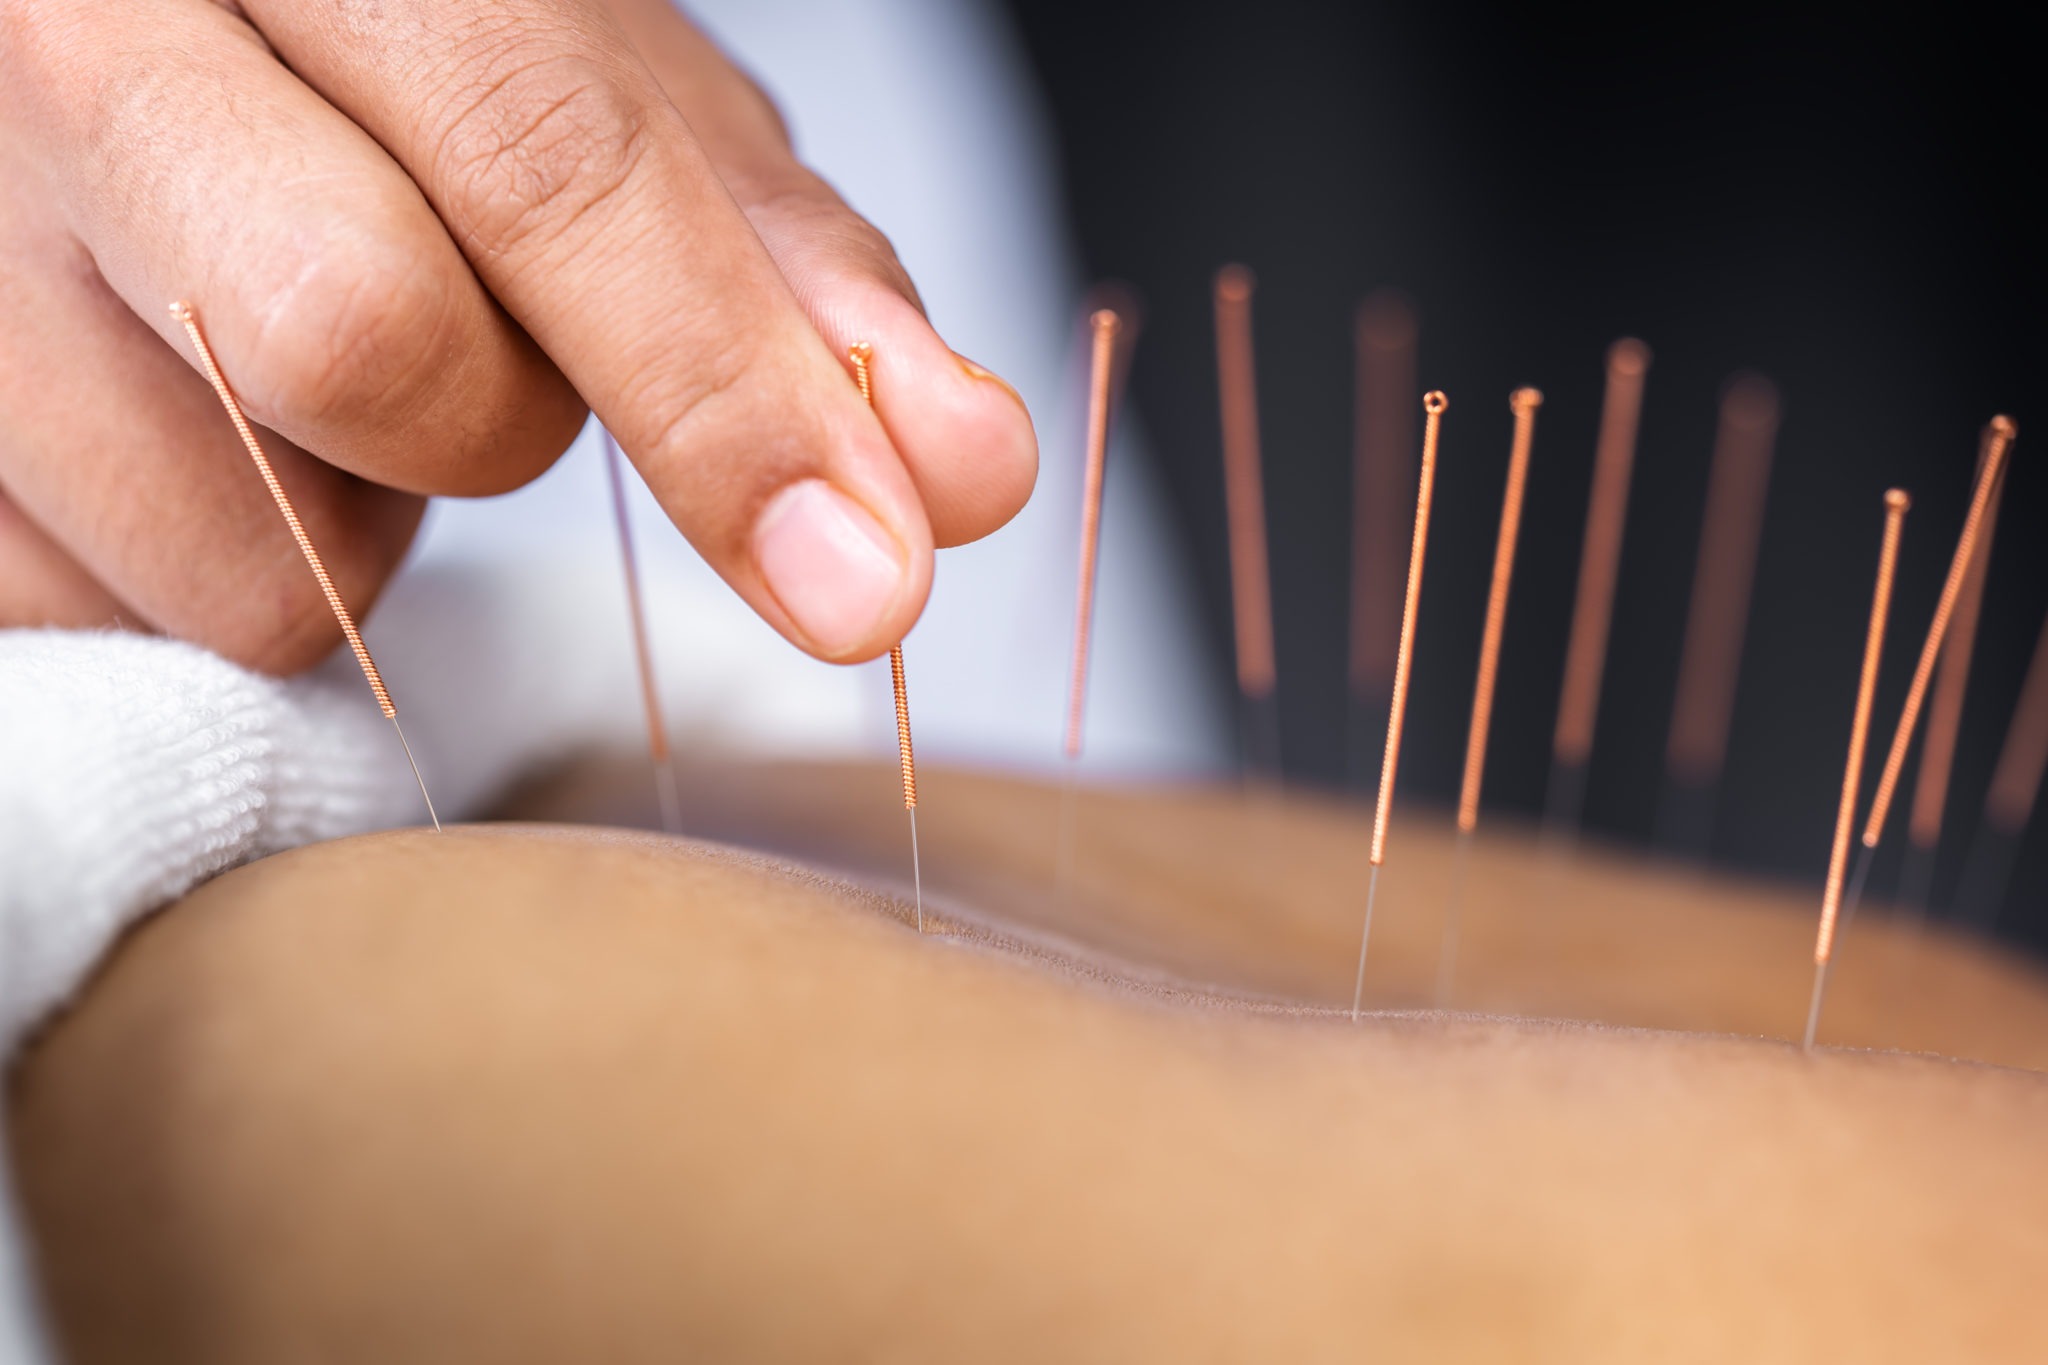 acupuncture needles and fire cupping tools